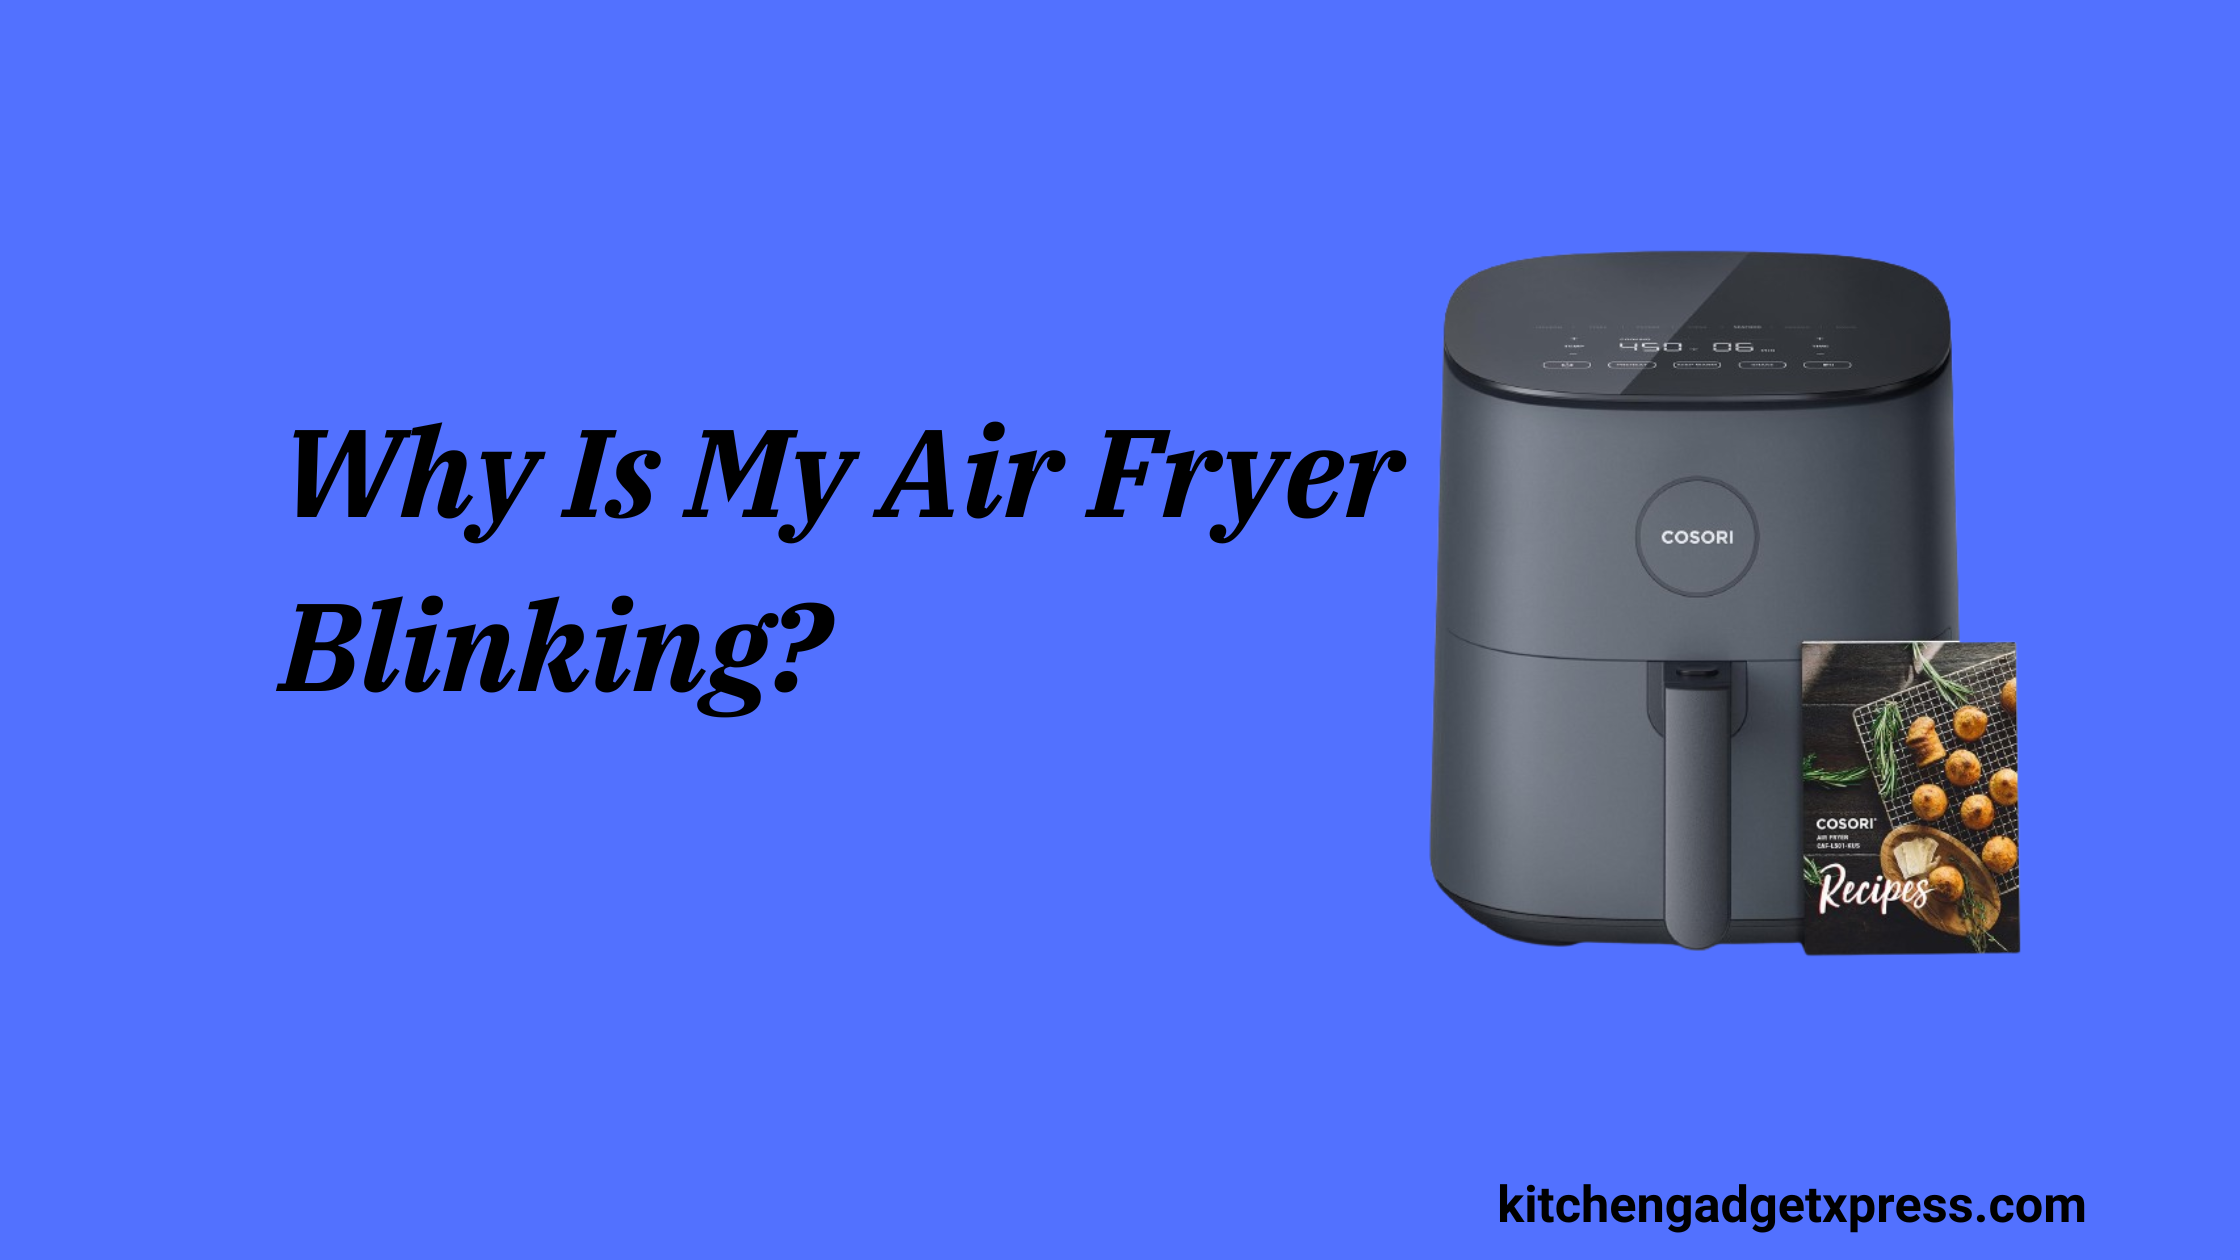 Why Is My Air Fryer Blinking?